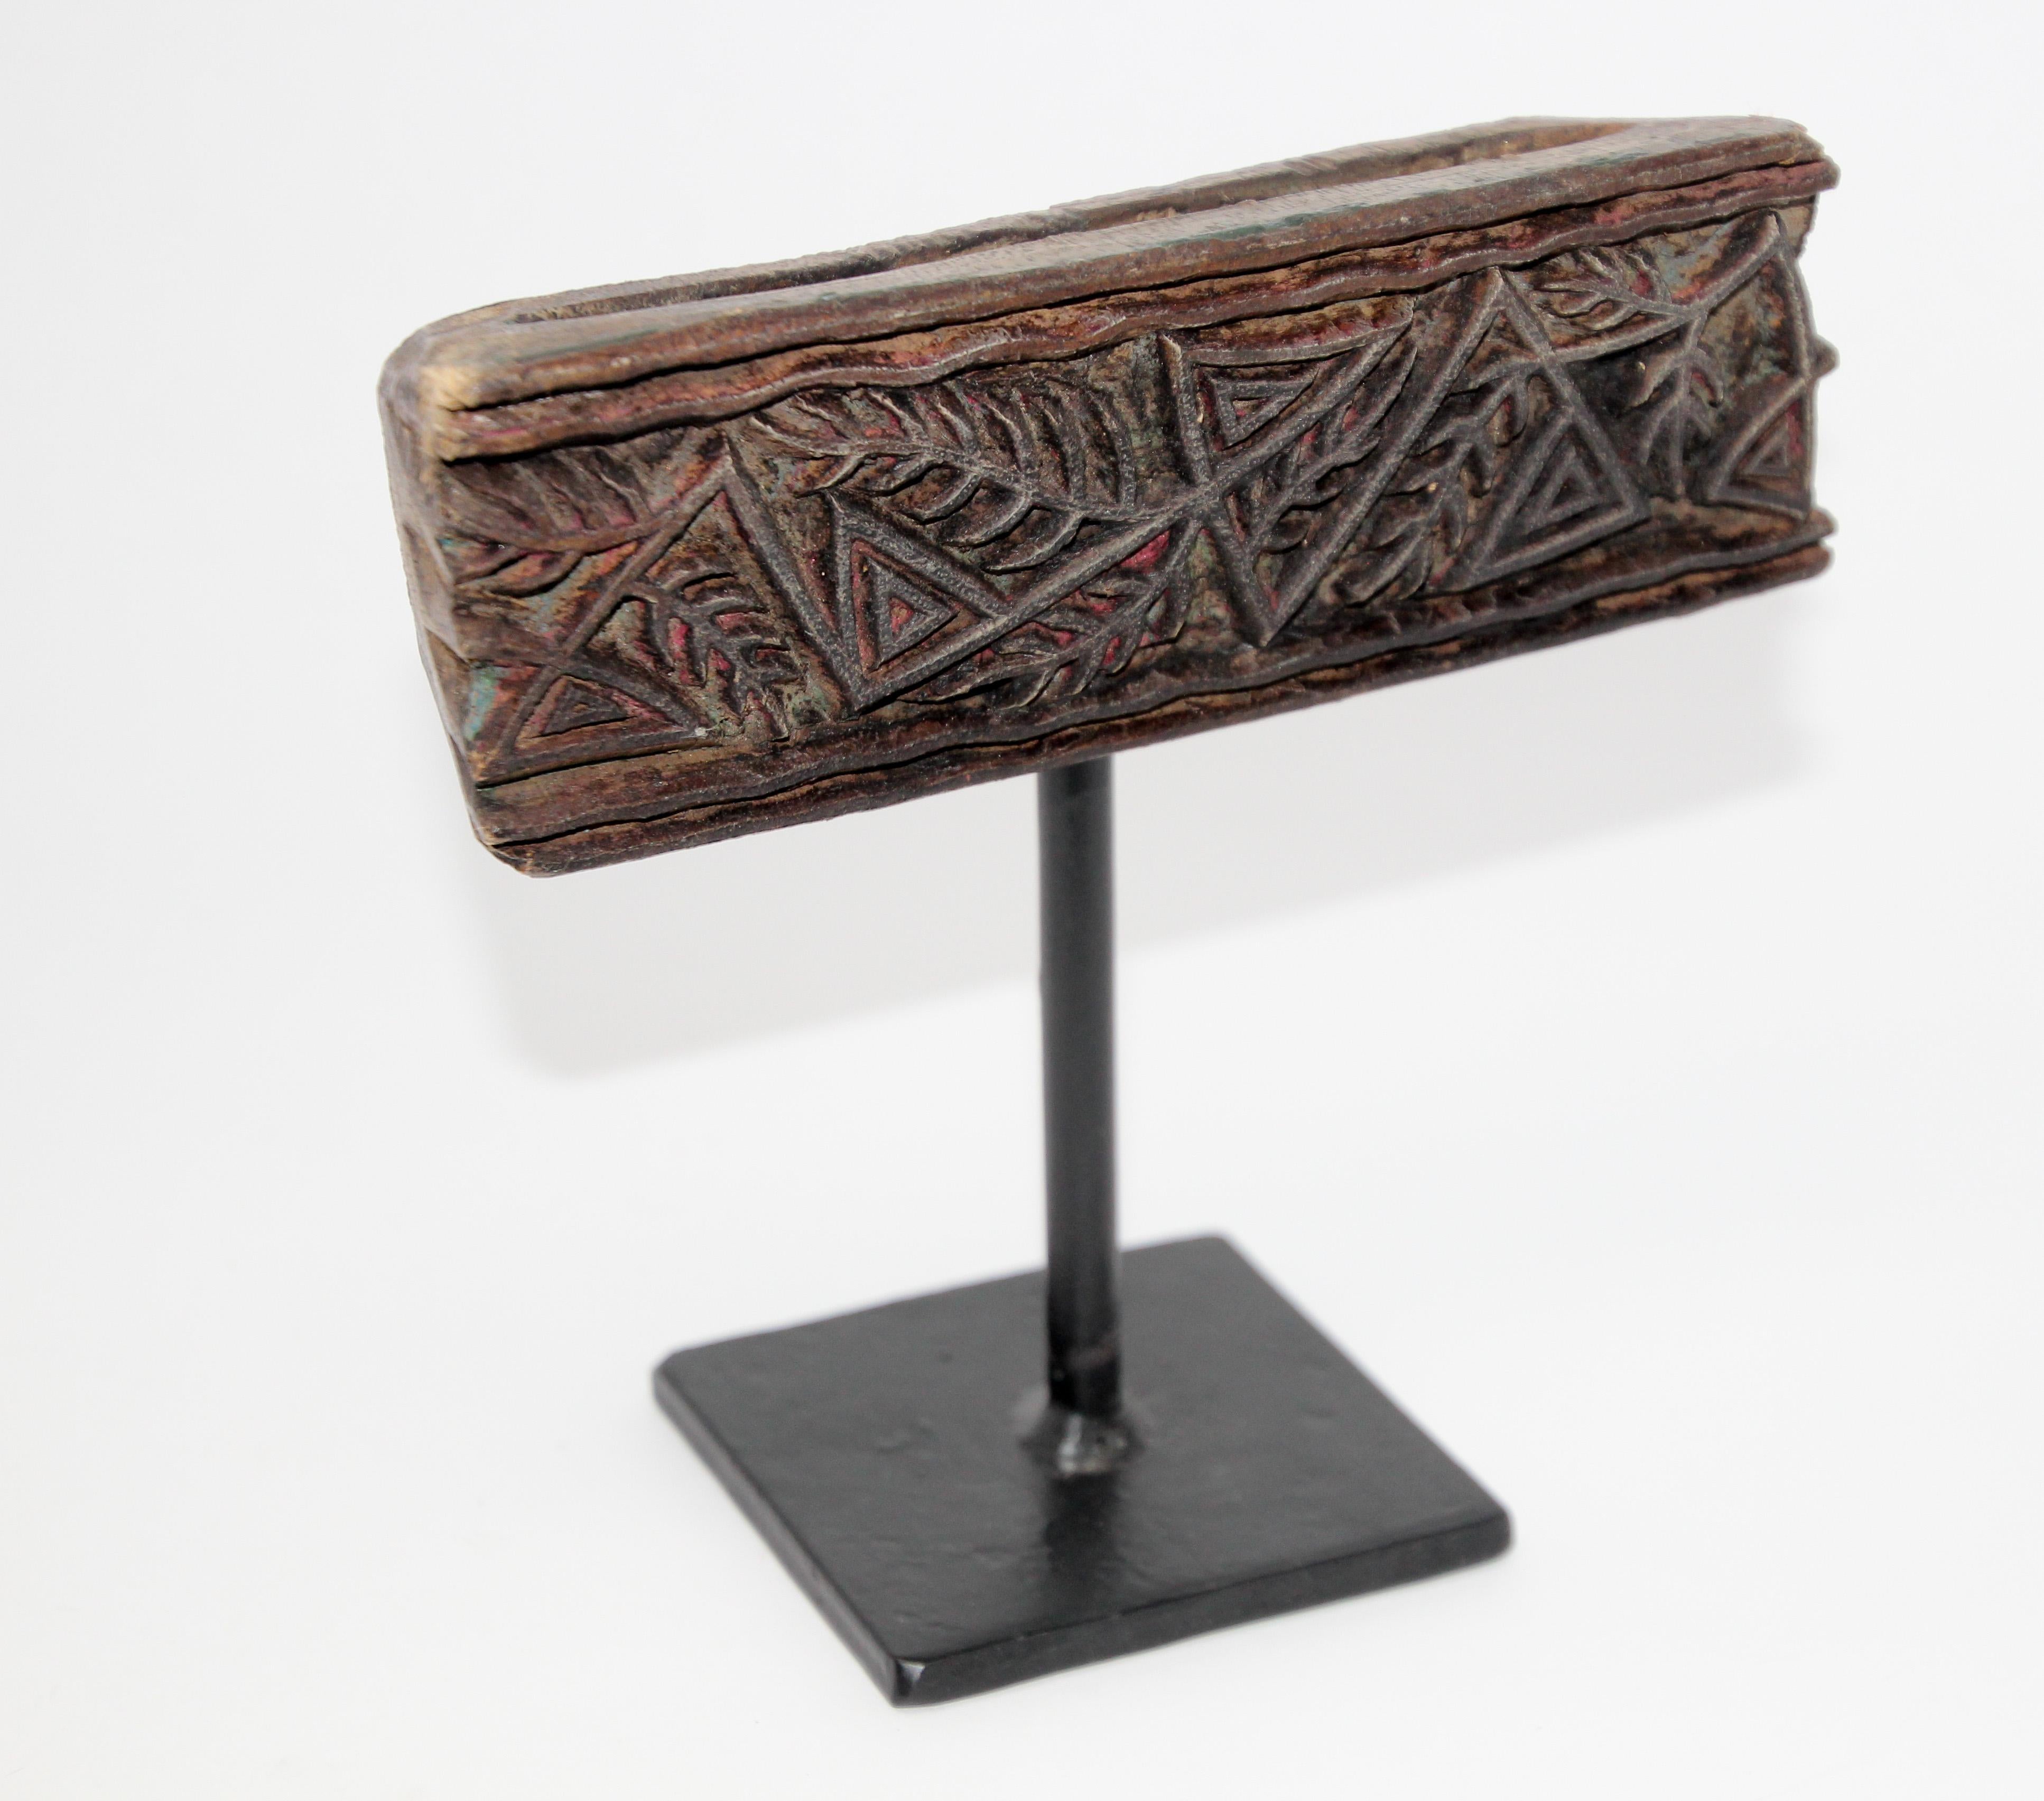 Hand-Carved Vintage Wooden Printing Block from India